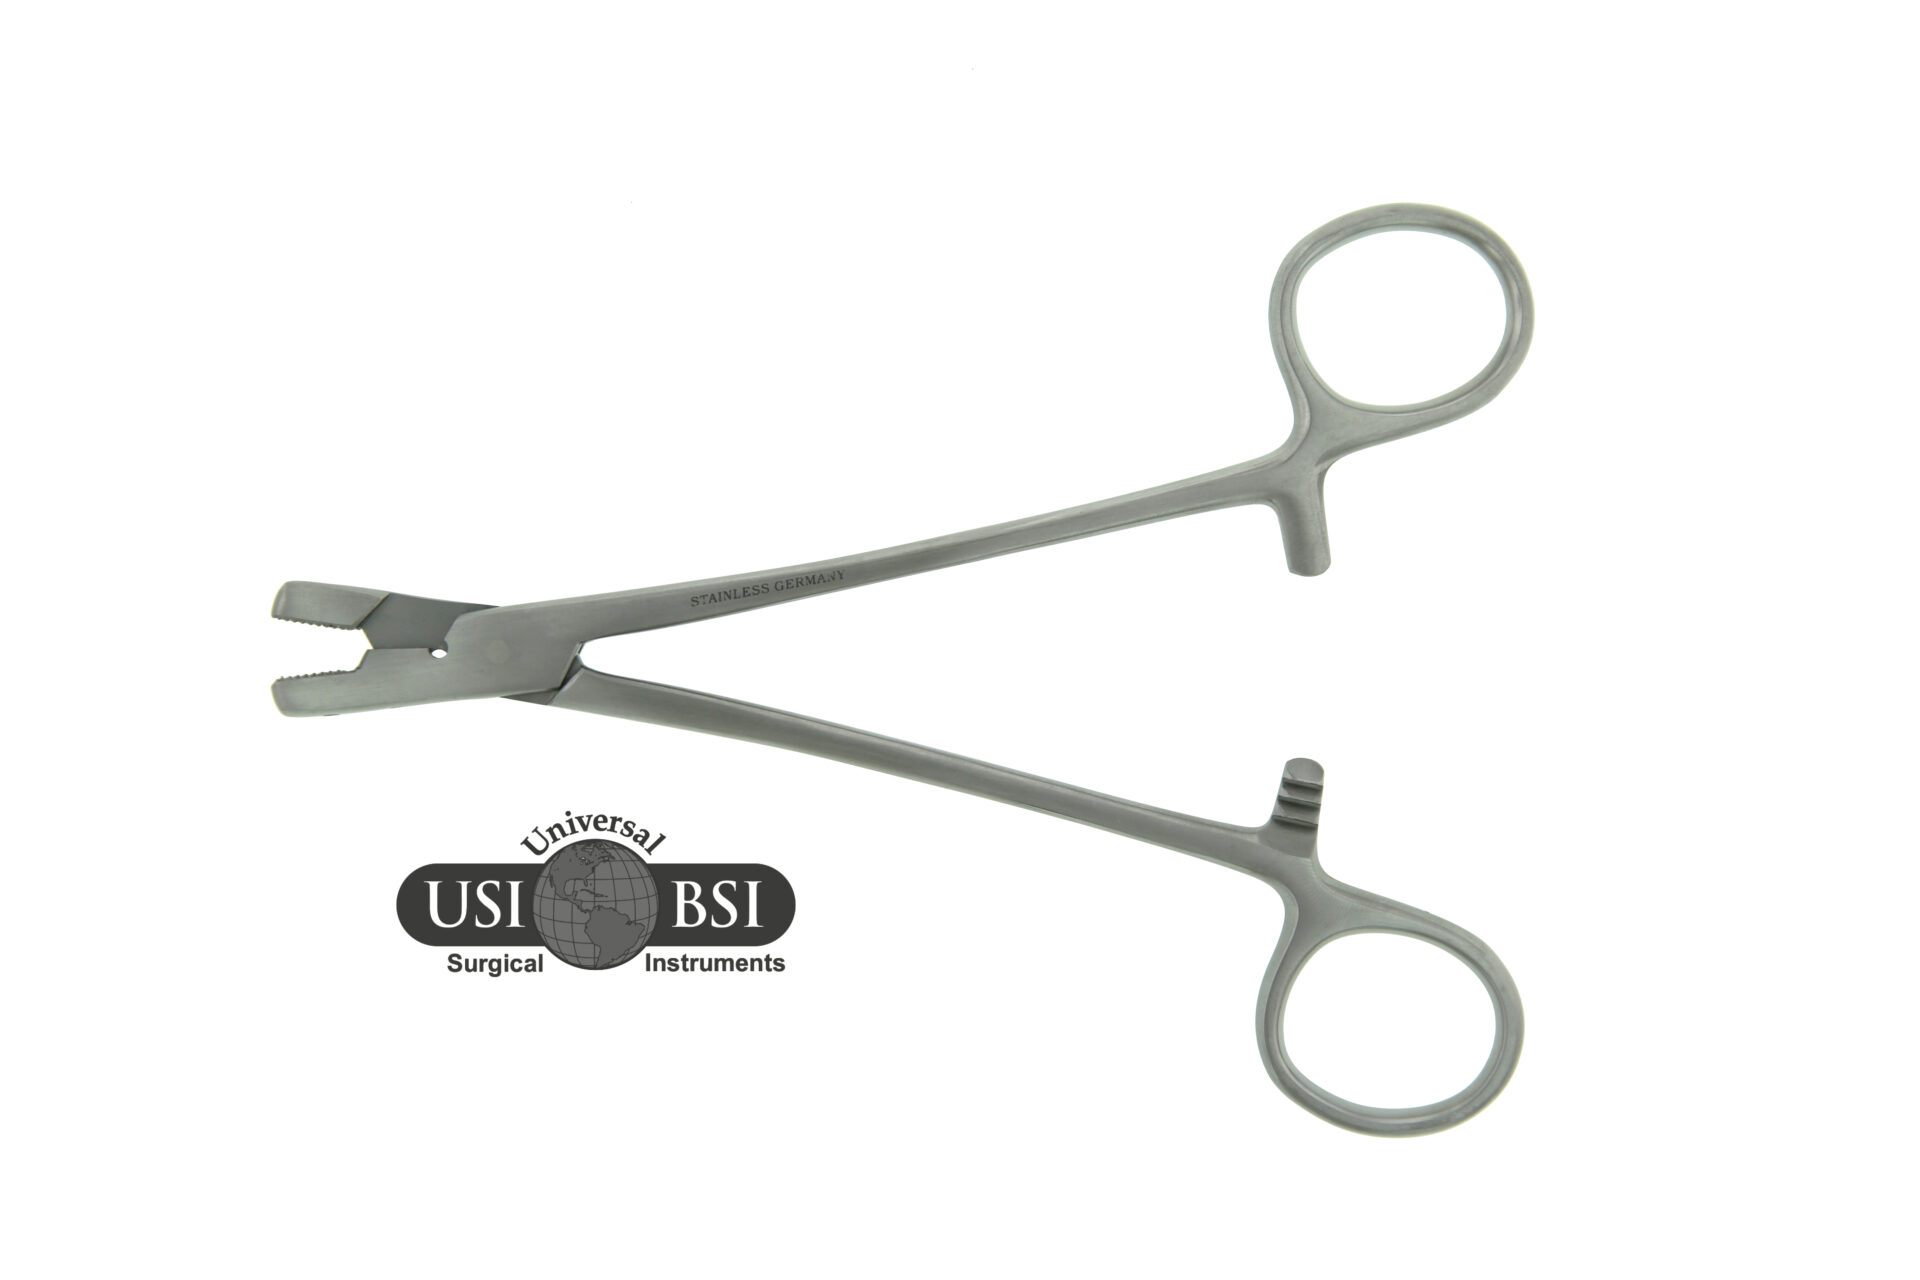 A pair of scissors with the usa bsi logo on top.